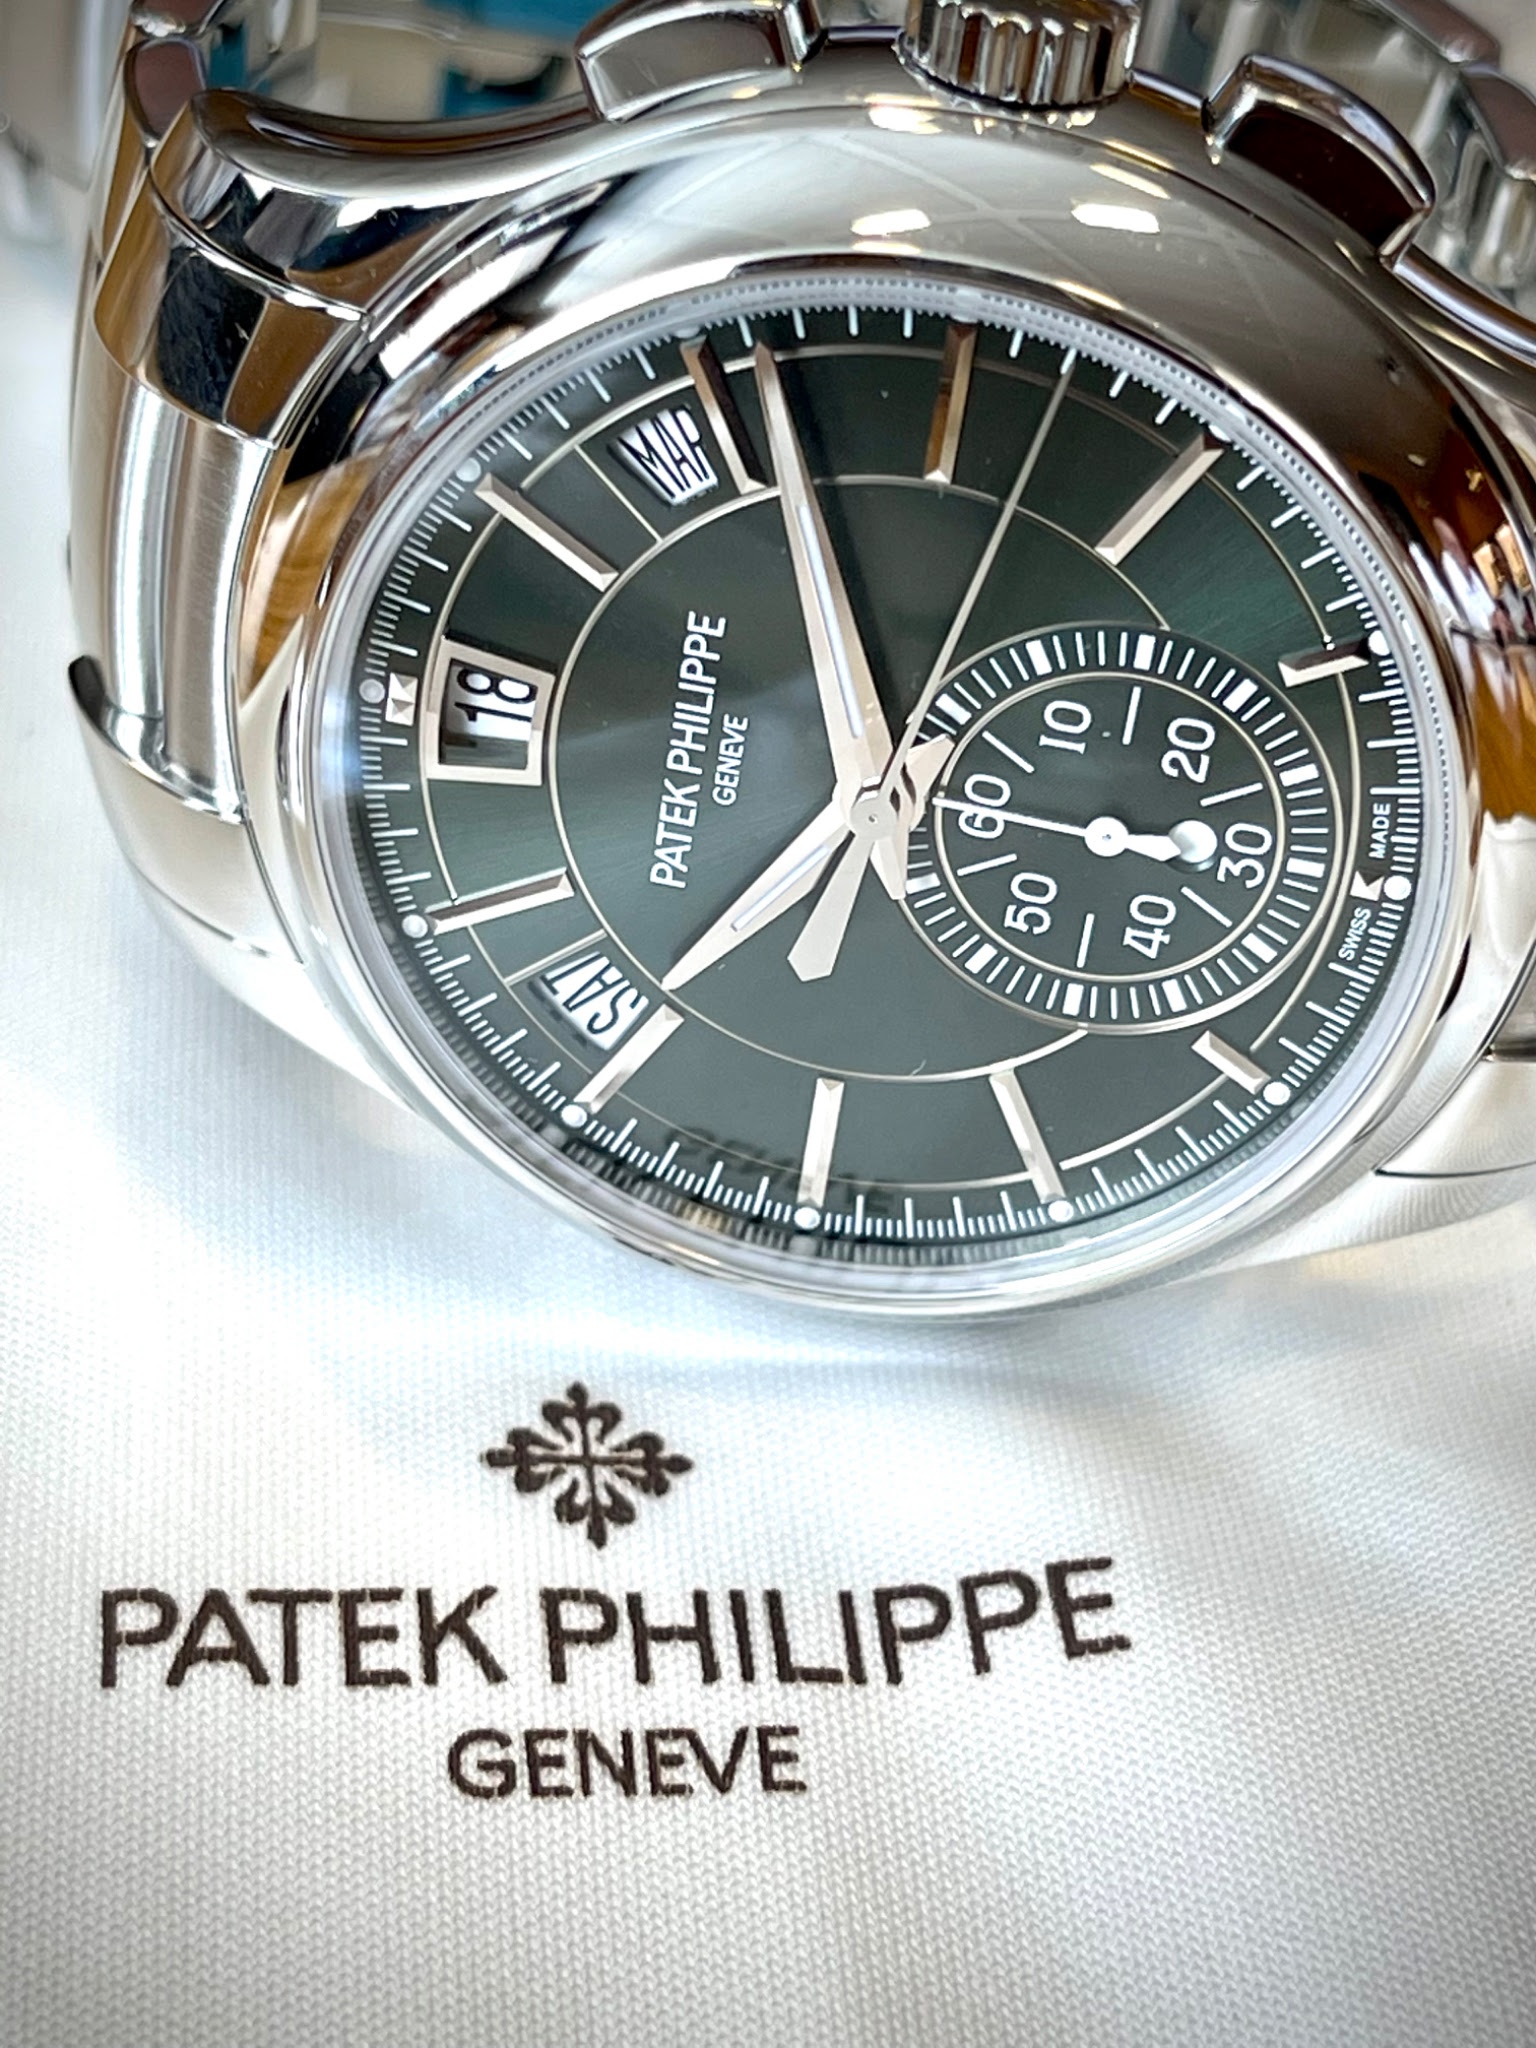 Patek Philippe - You made the right choice!